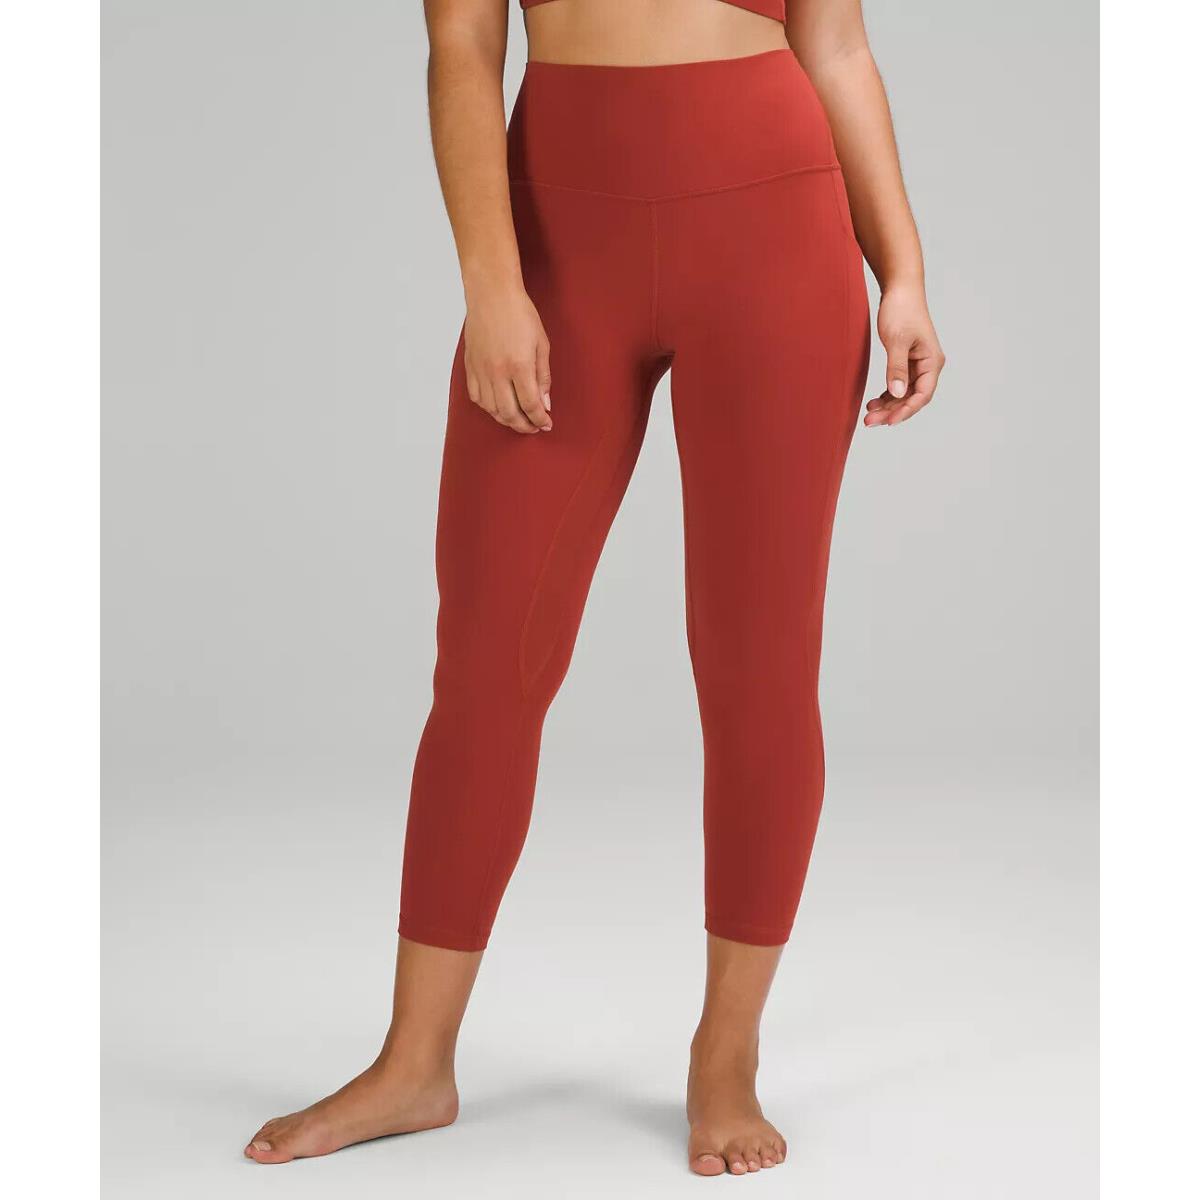 Lululemon Align HR Pant 25 with Pockets - Retail Cayenne